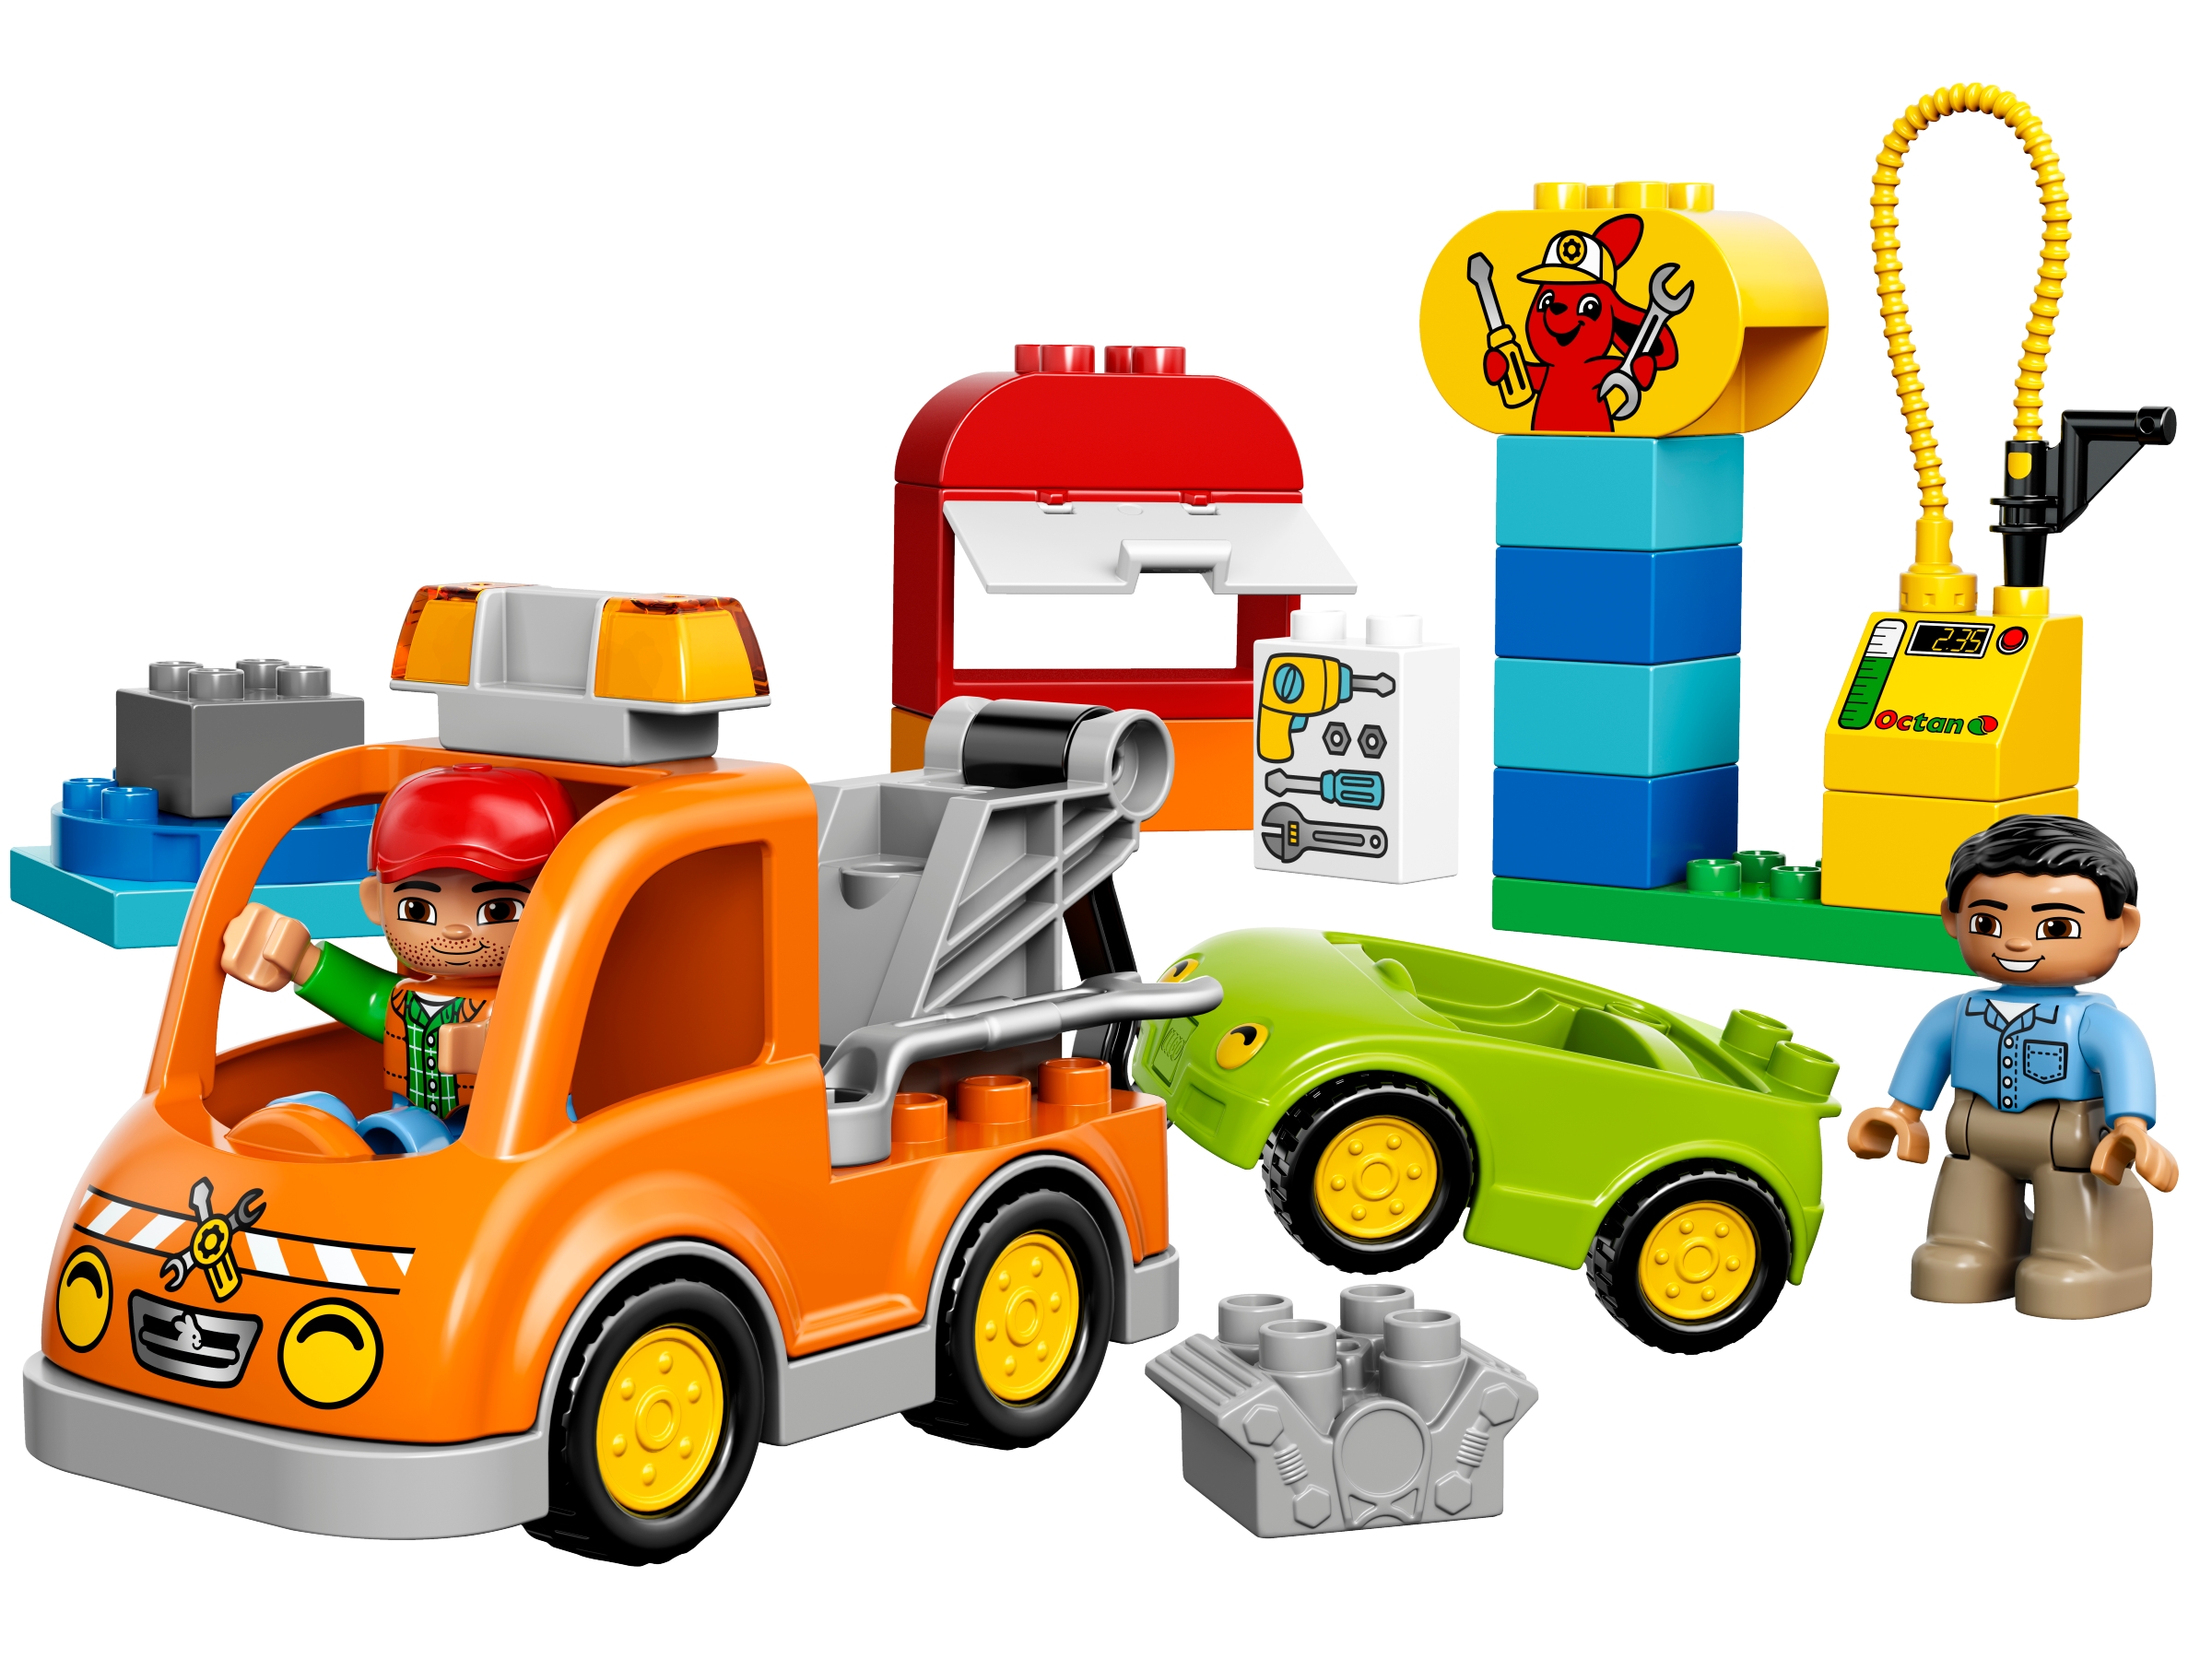 Tow Truck 10814 | DUPLO® Buy online at the LEGO® US